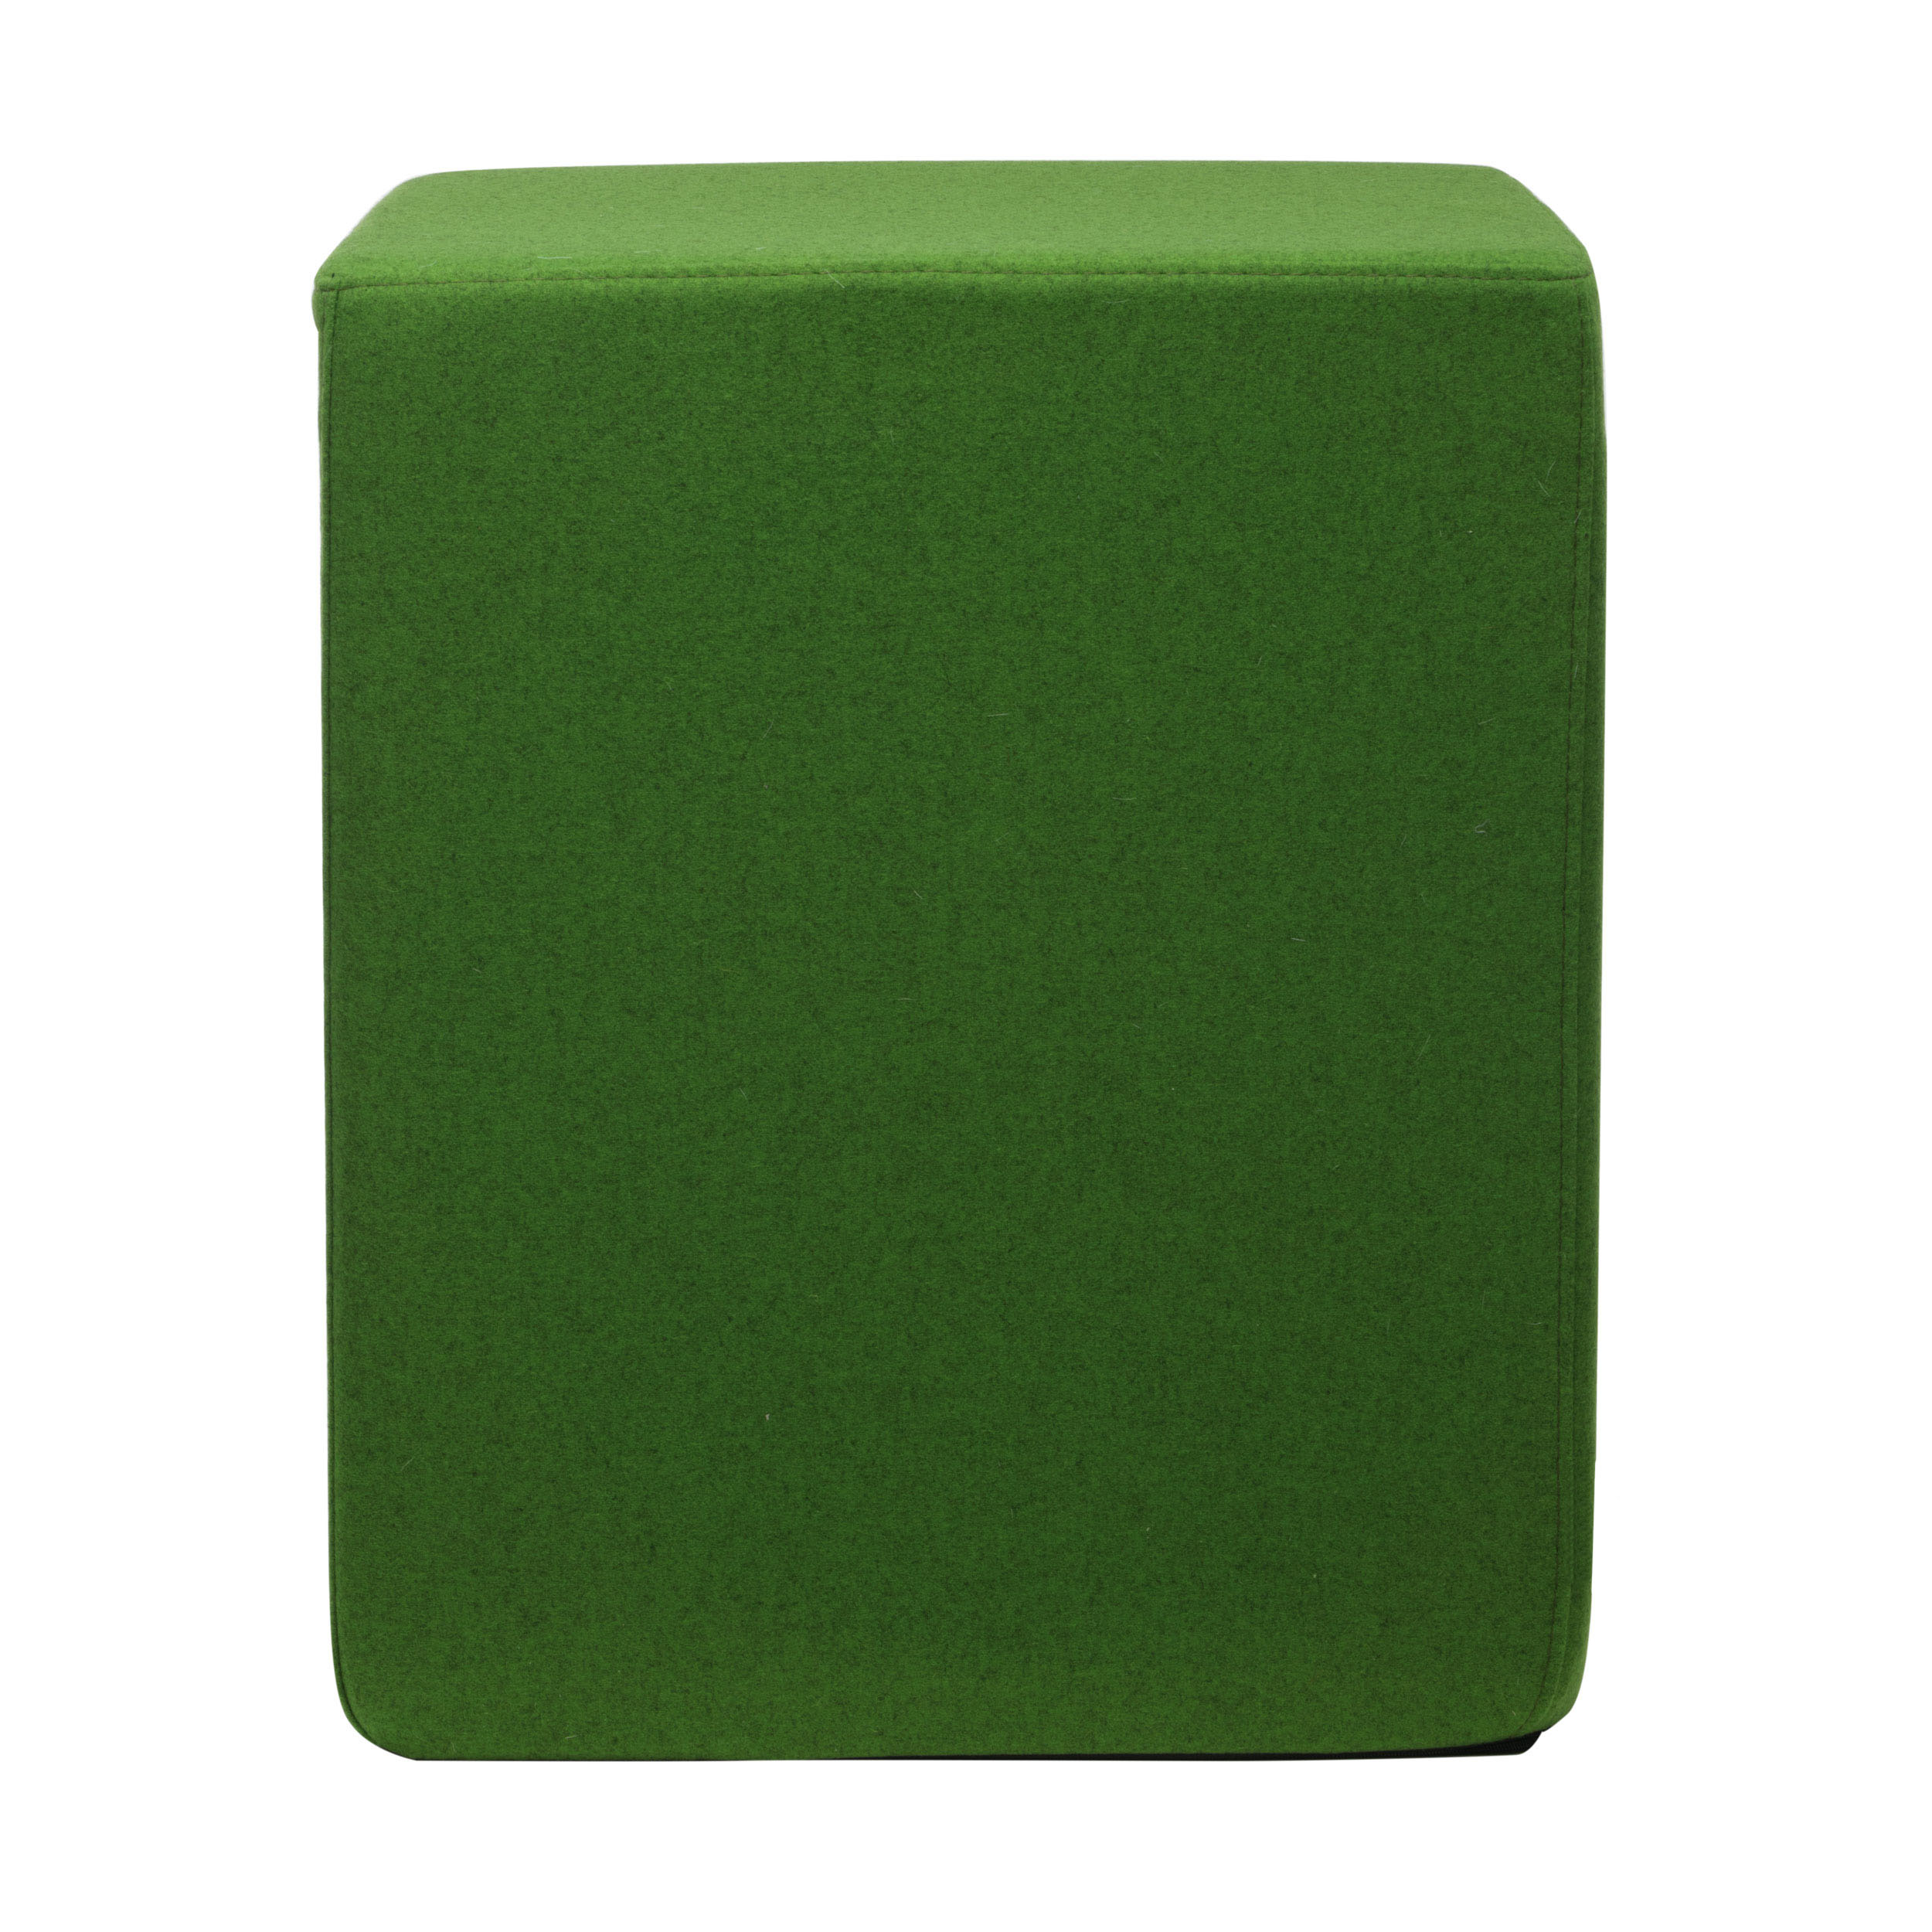 Dining Pouf in Loden